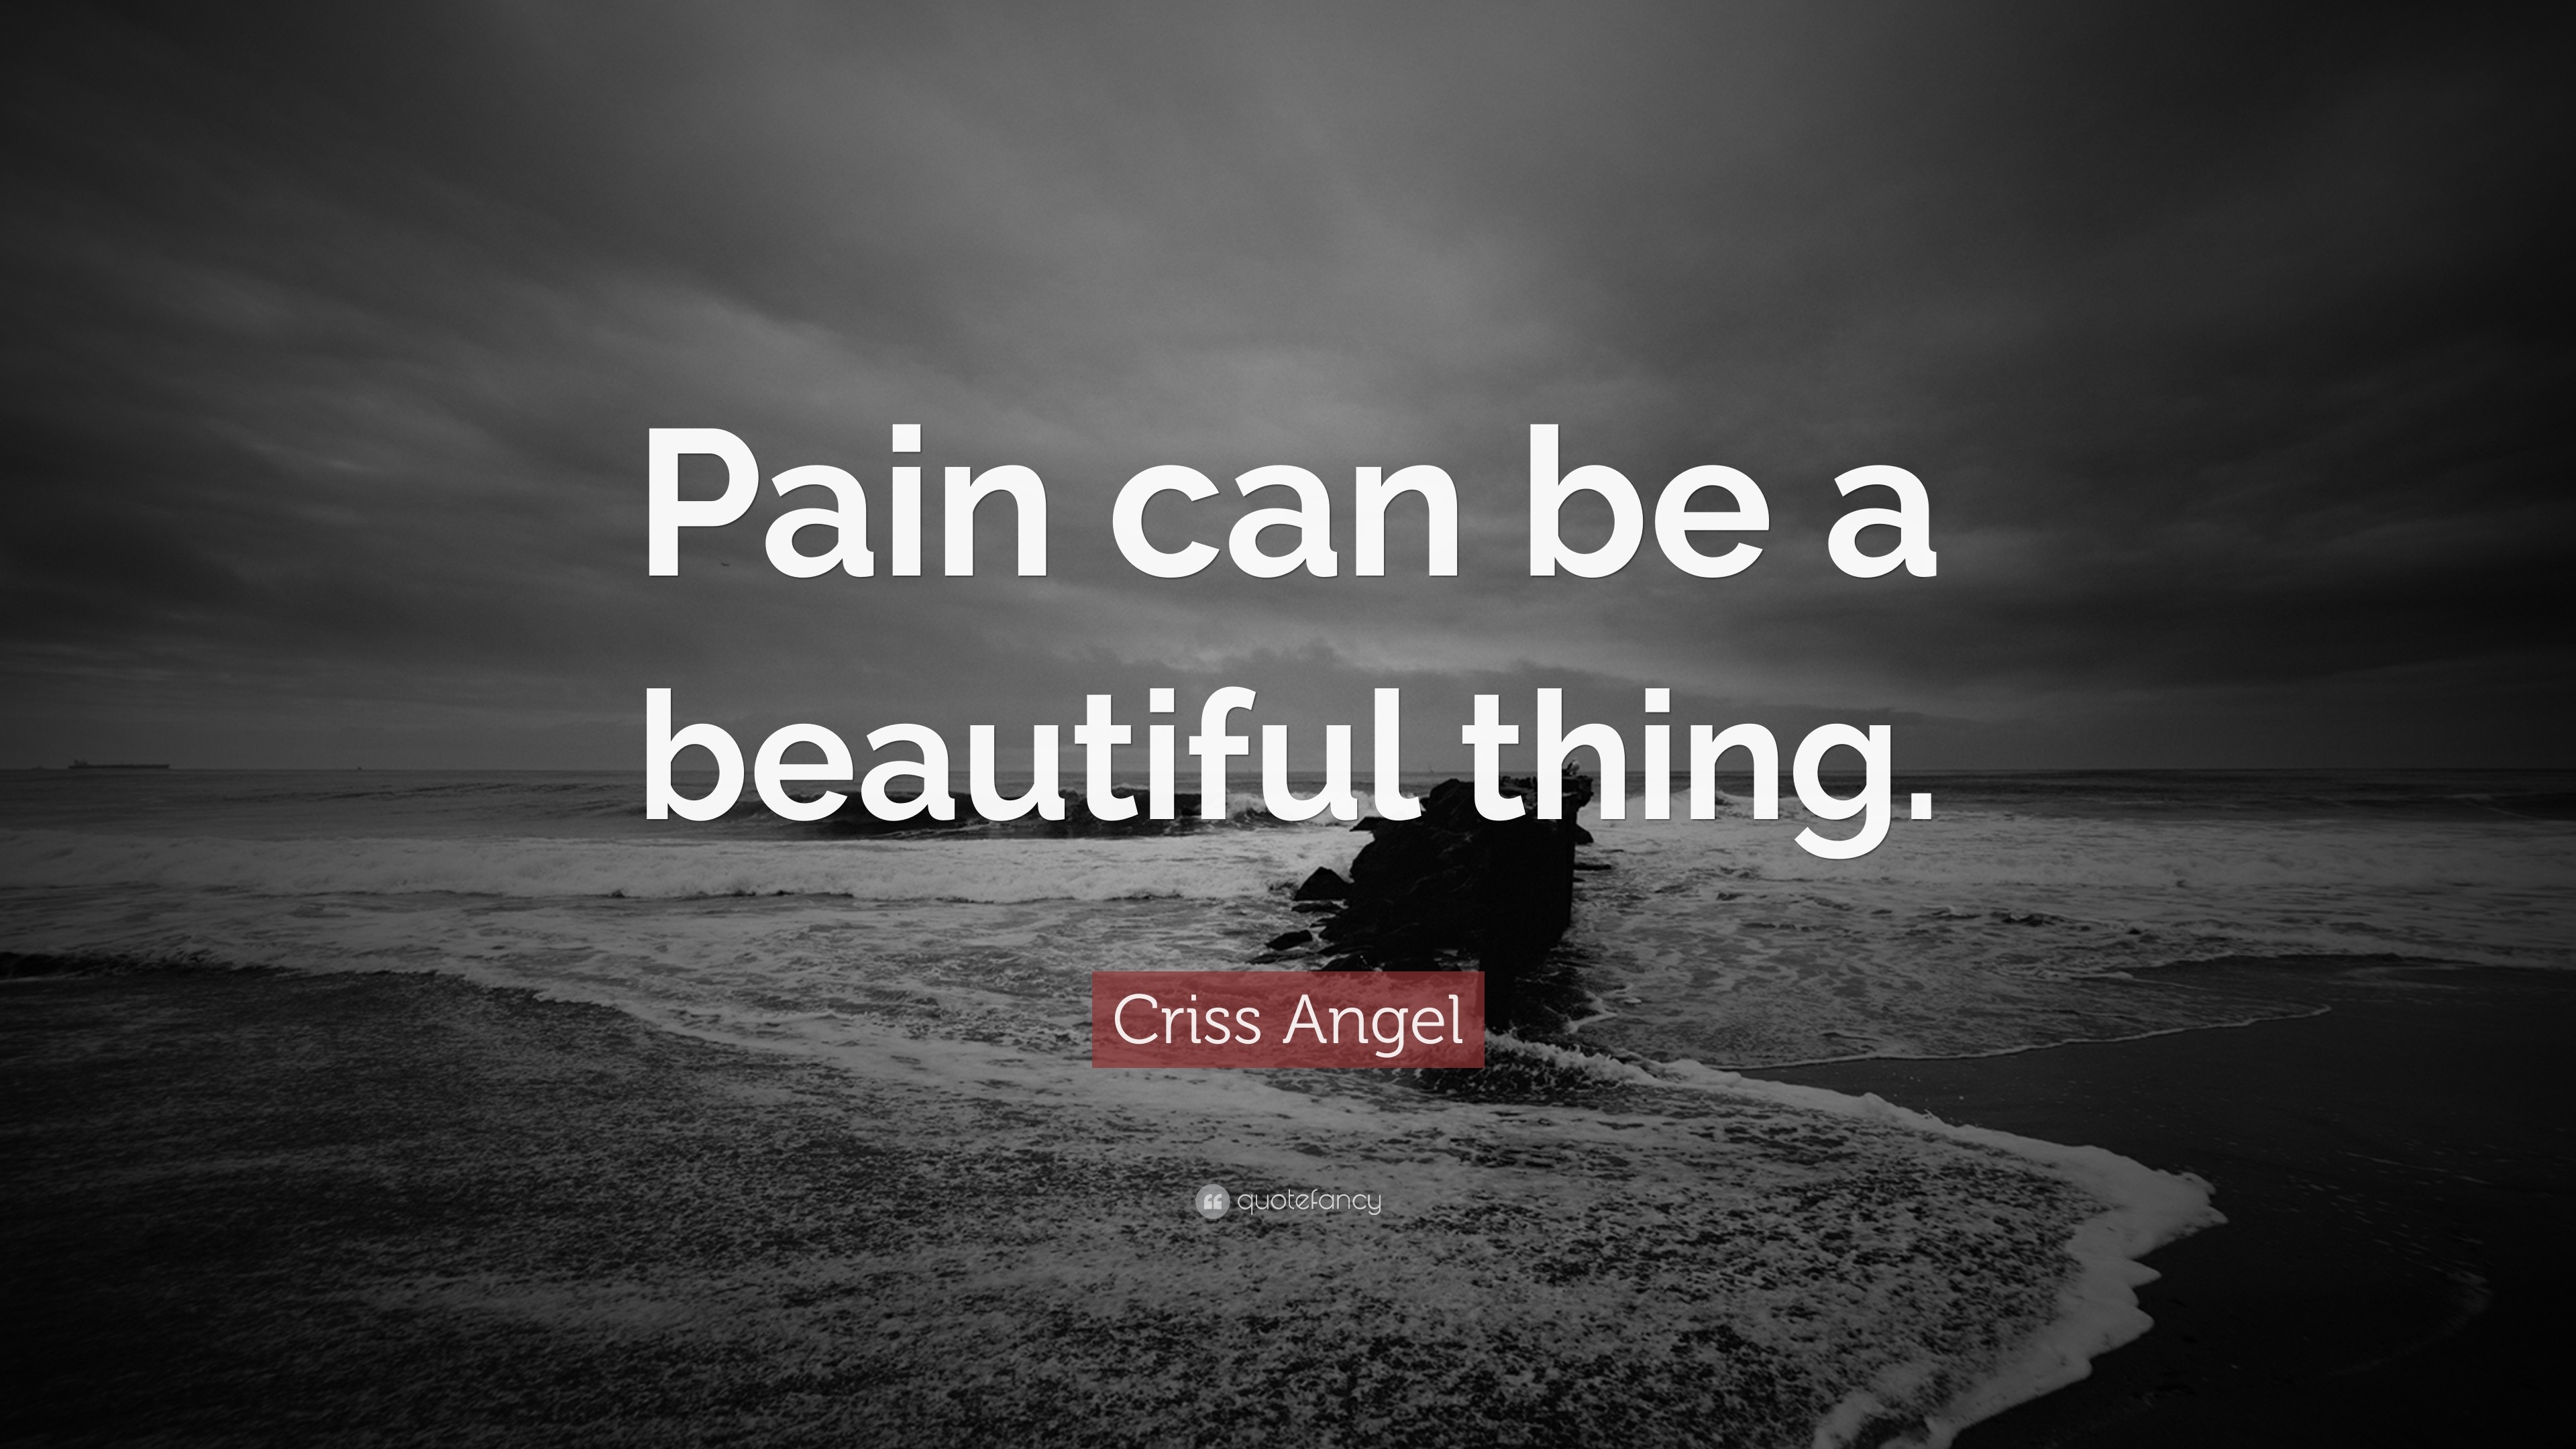 3840x2160 Criss Angel Quote: “Pain can be a beautiful thing.”